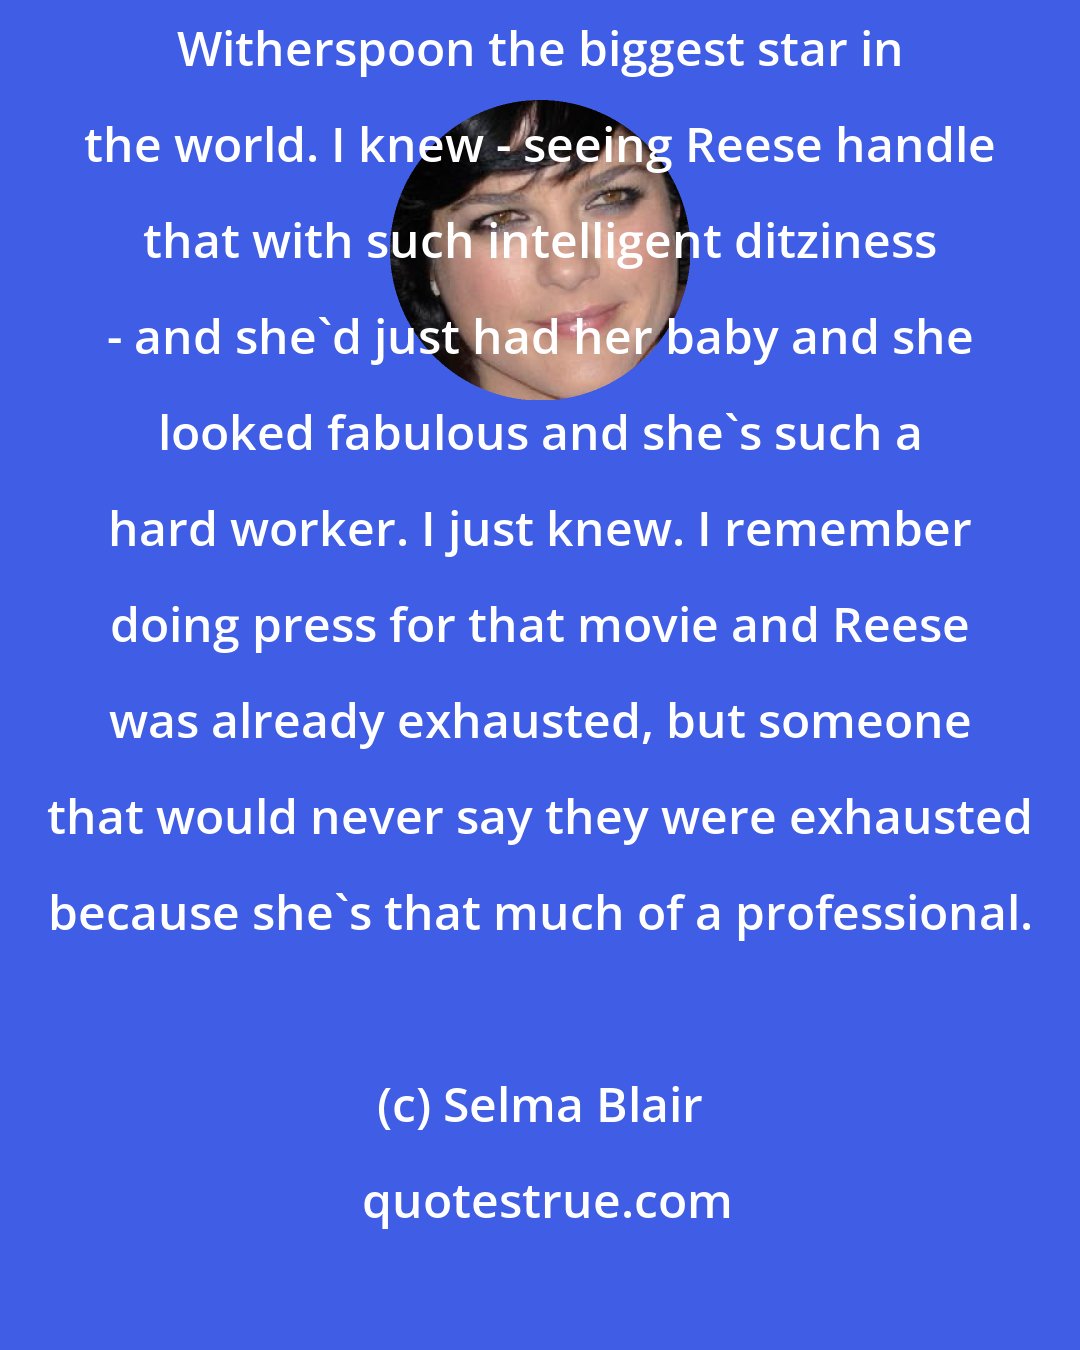 Selma Blair: Legally Blonde was something that I just knew was going to make Reese Witherspoon the biggest star in the world. I knew - seeing Reese handle that with such intelligent ditziness - and she'd just had her baby and she looked fabulous and she's such a hard worker. I just knew. I remember doing press for that movie and Reese was already exhausted, but someone that would never say they were exhausted because she's that much of a professional.